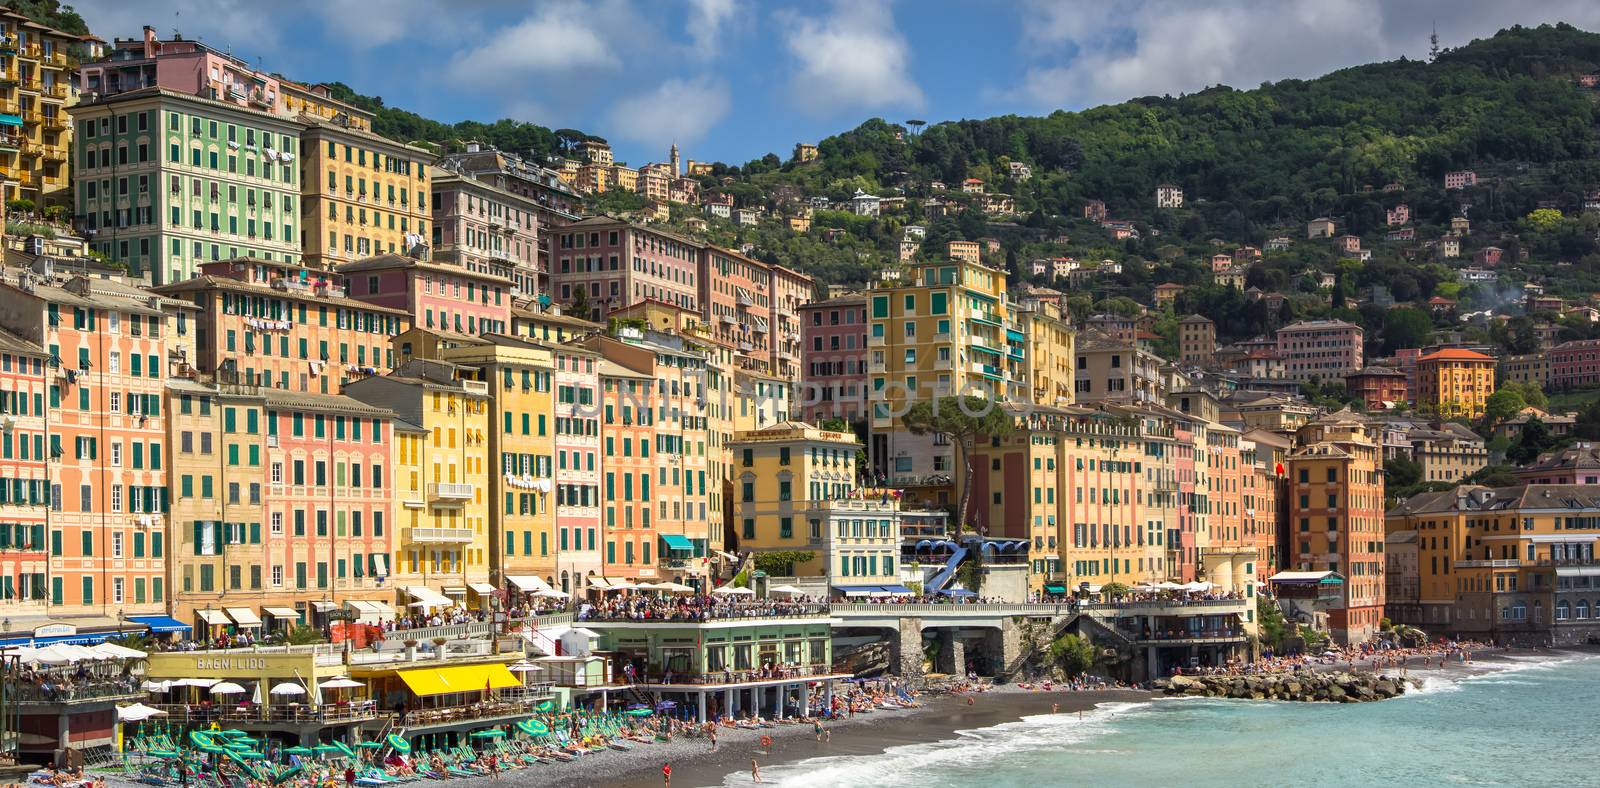 The town of Camogli on the banks of the Ligurian coast in Italy